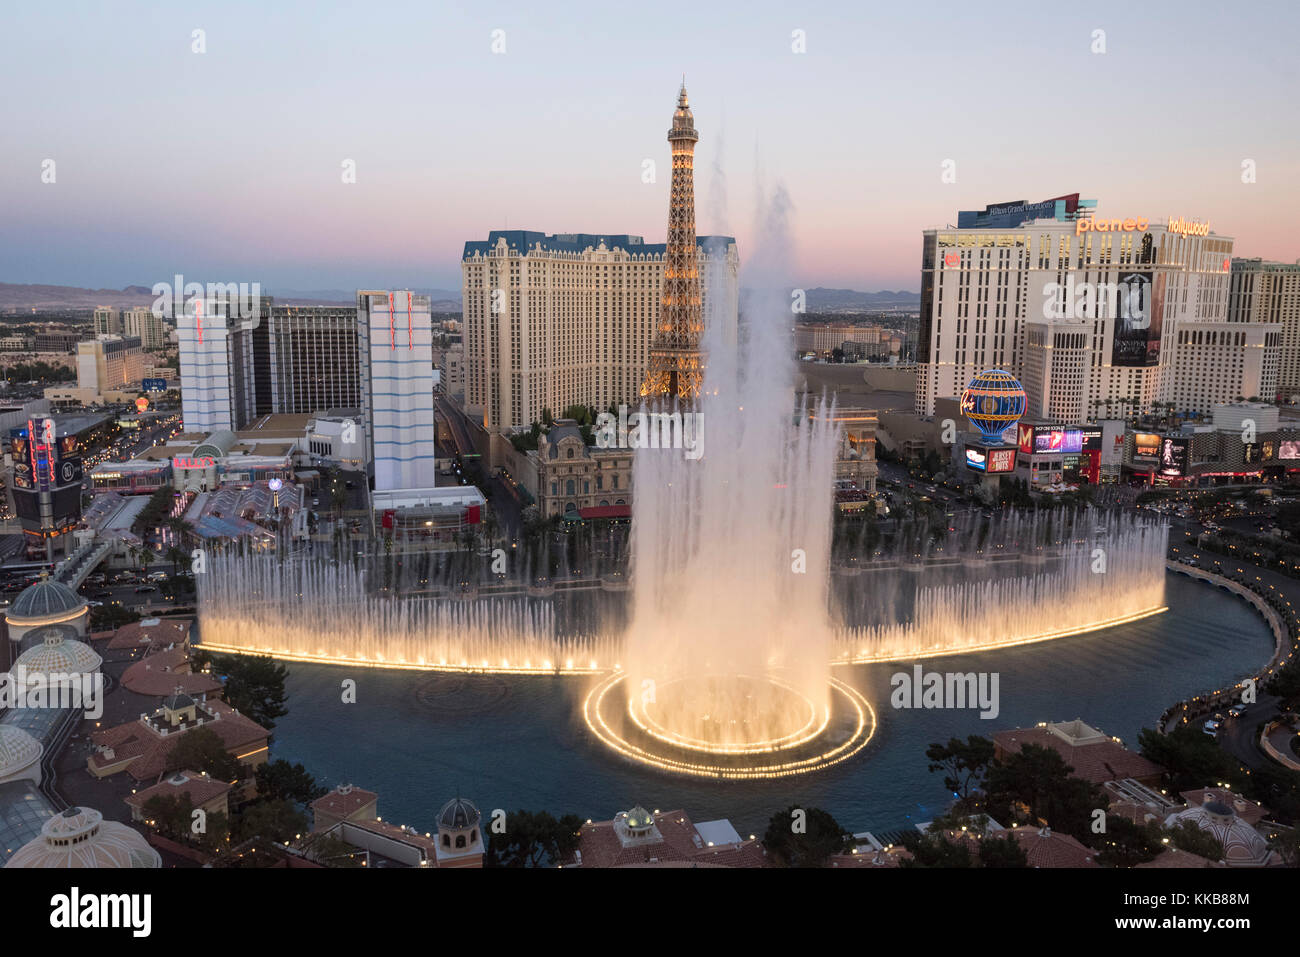 View of Bellagio fountains and part of the Strip at dusk, Las Vegas, Nevada, USA Stock Photo